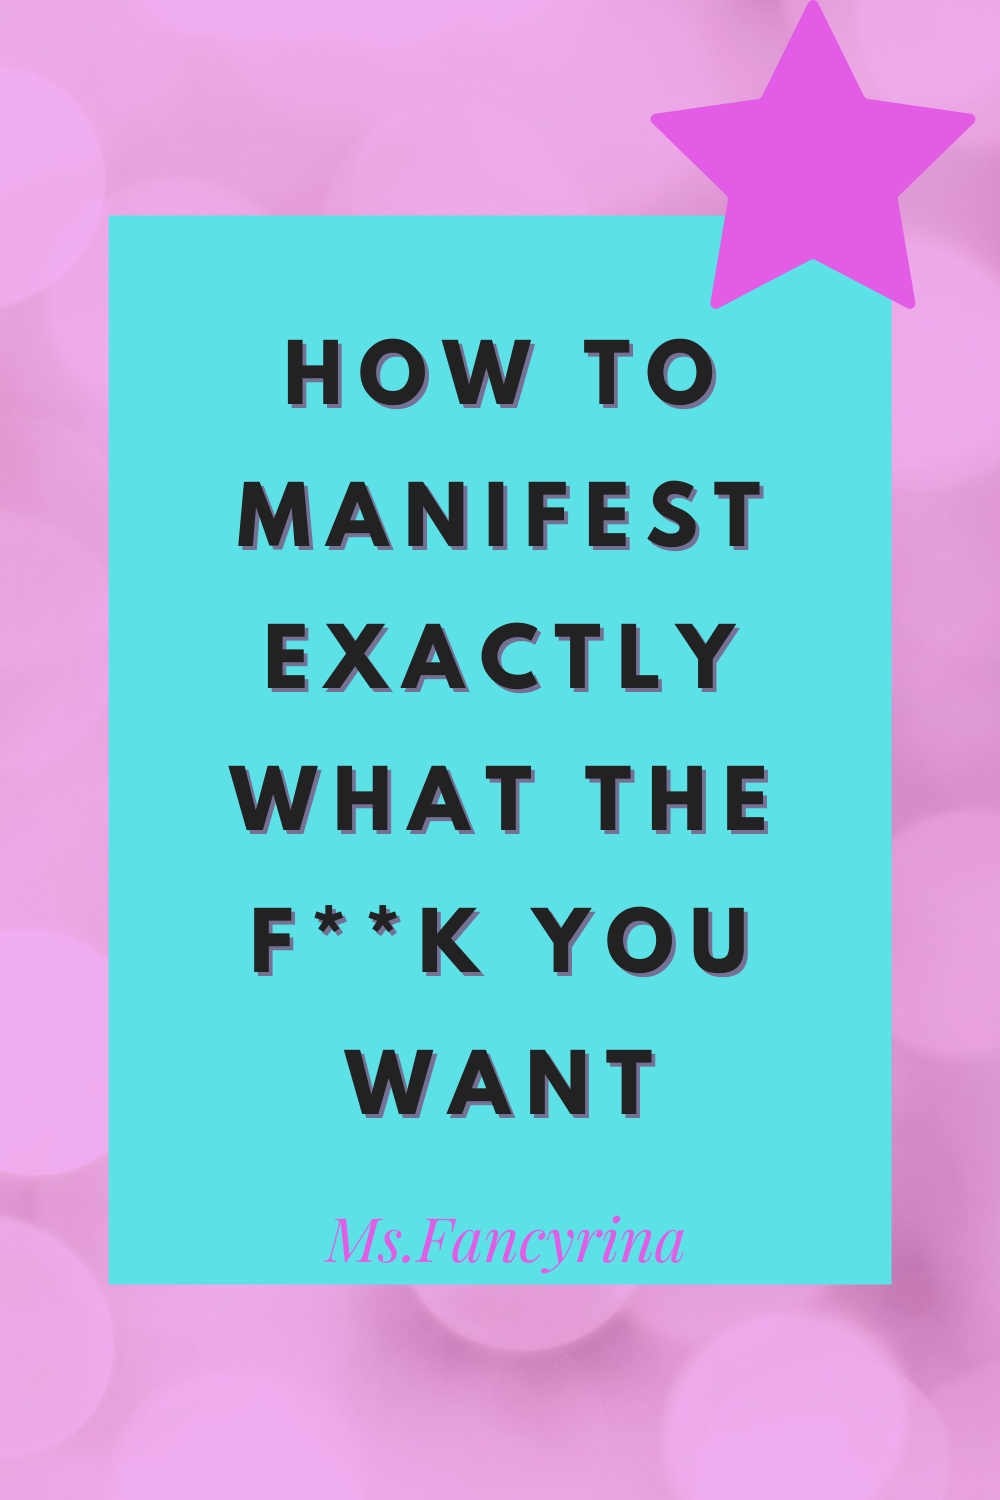 How To Manifest Exactly What The F**k You Want